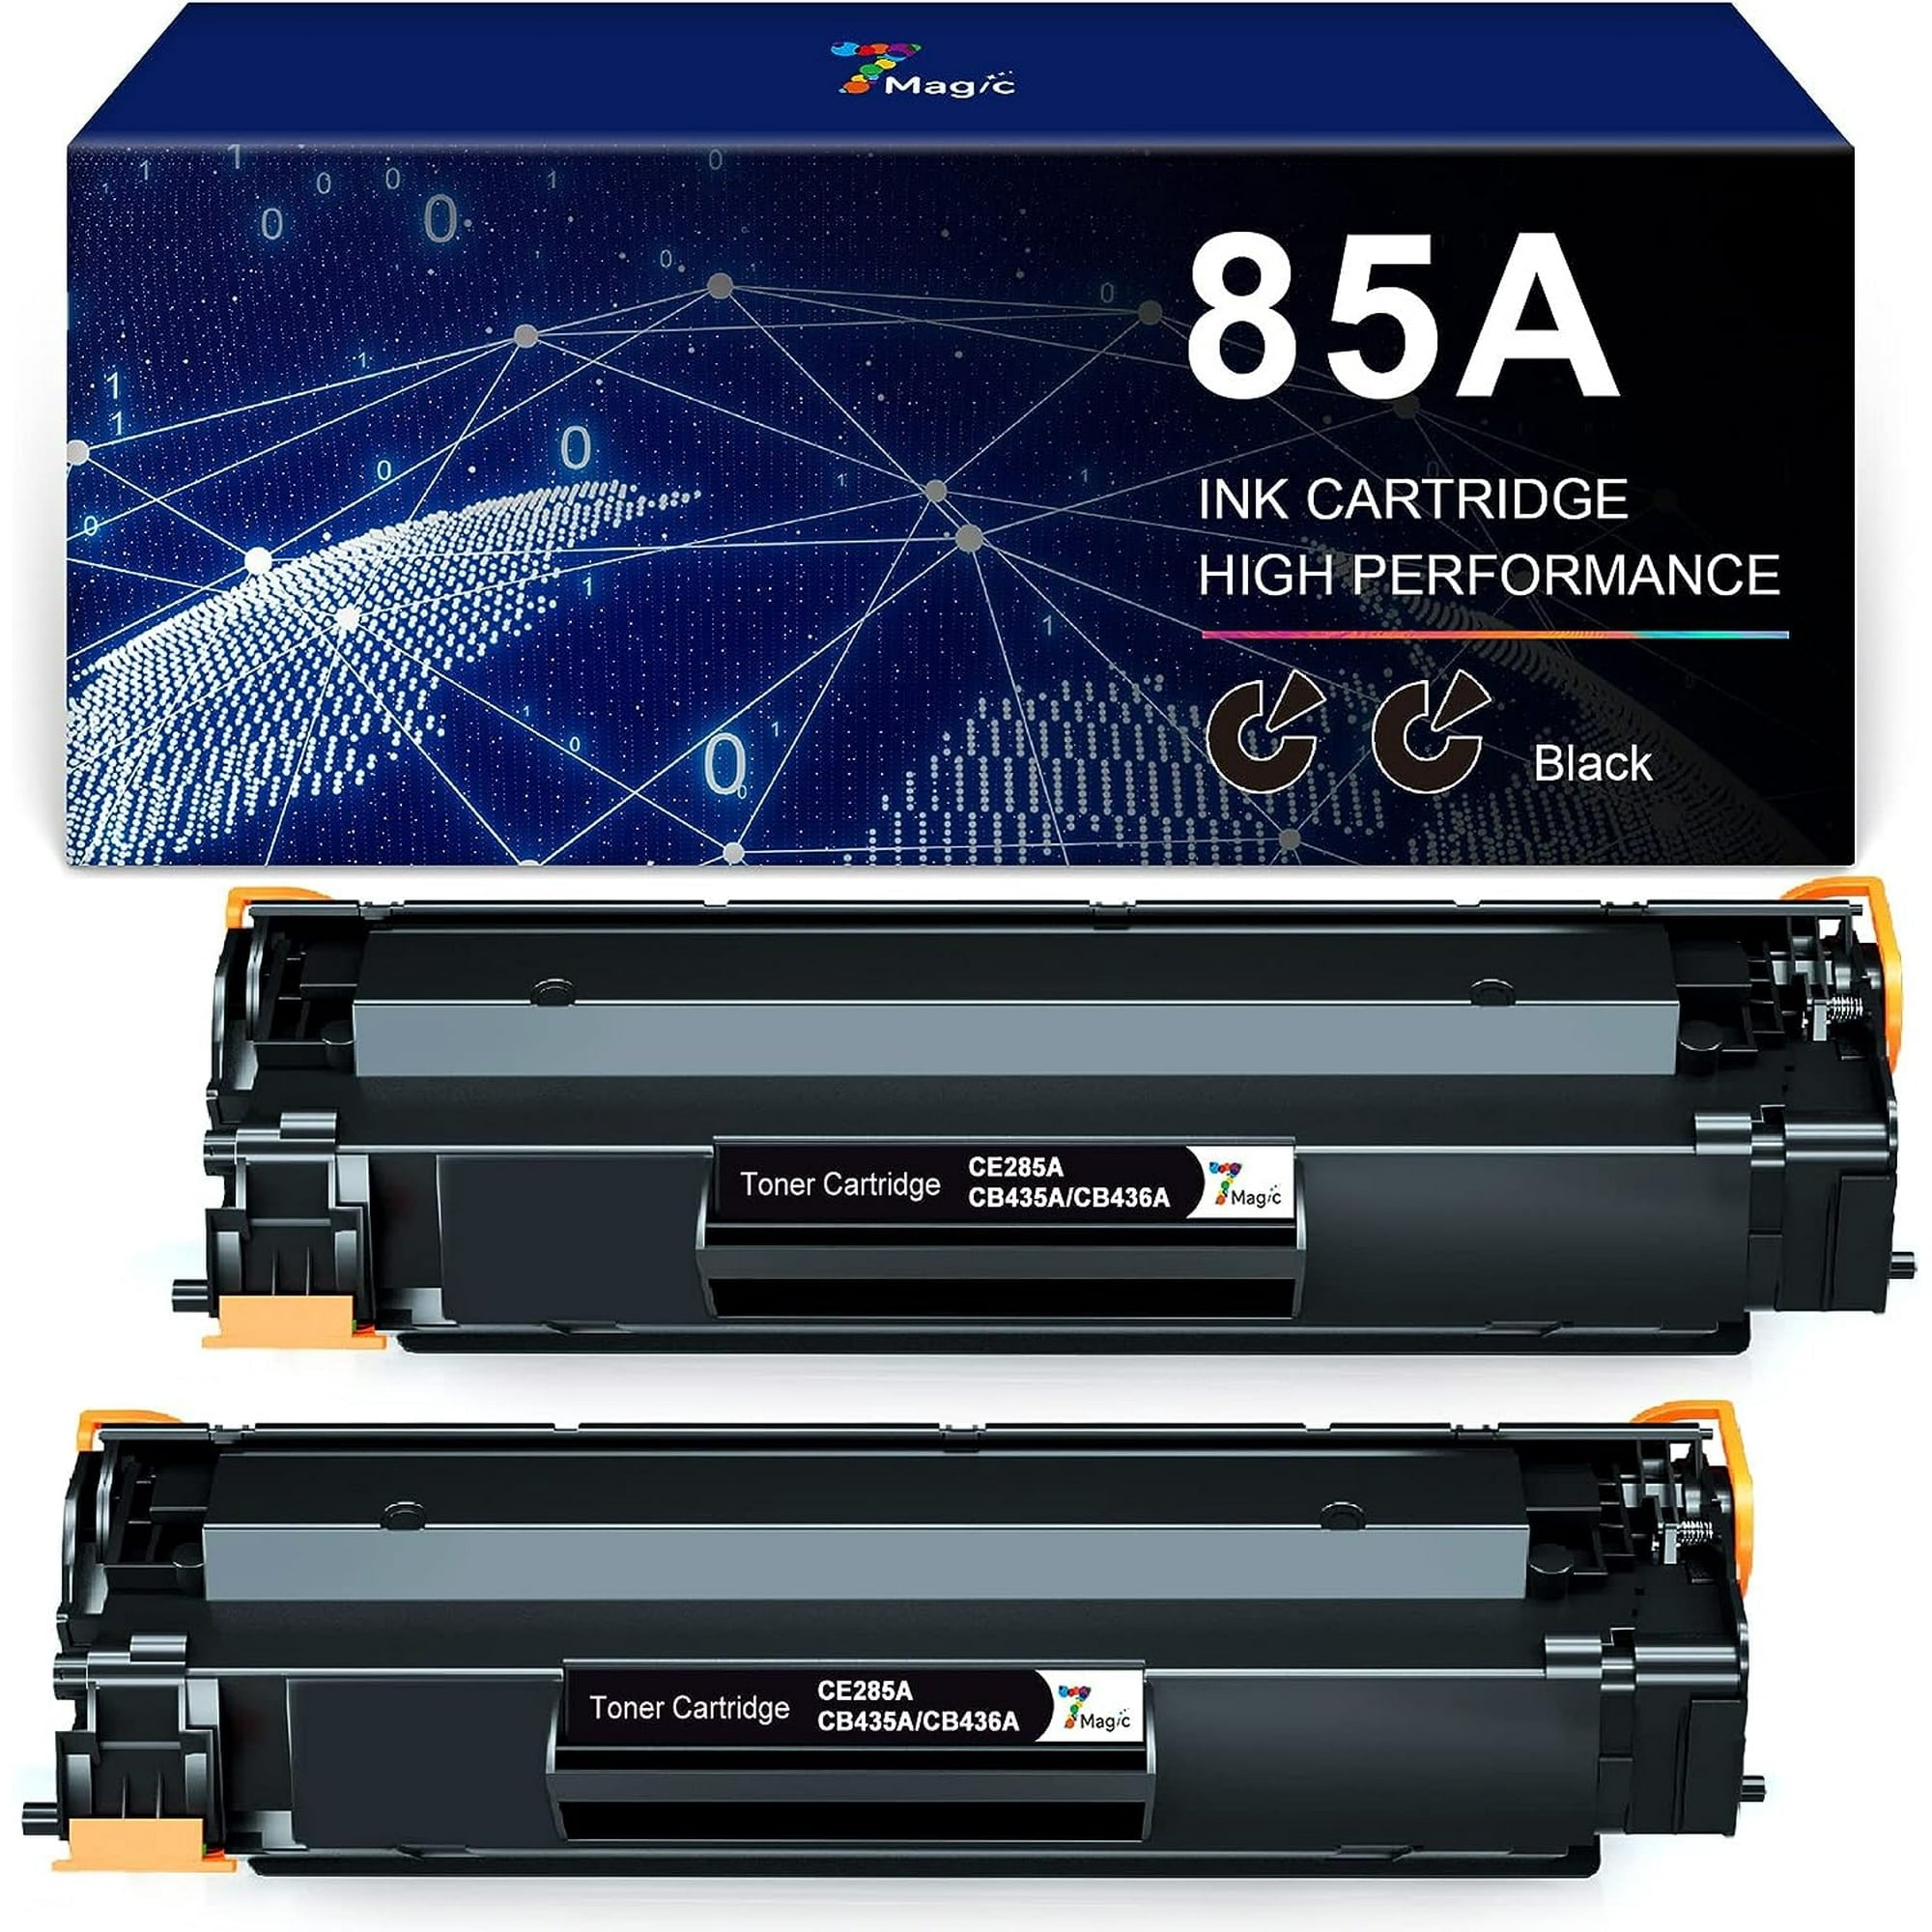 85A Toner Cartridge Replacement for HP Printers Ink (Black 2 Pack)